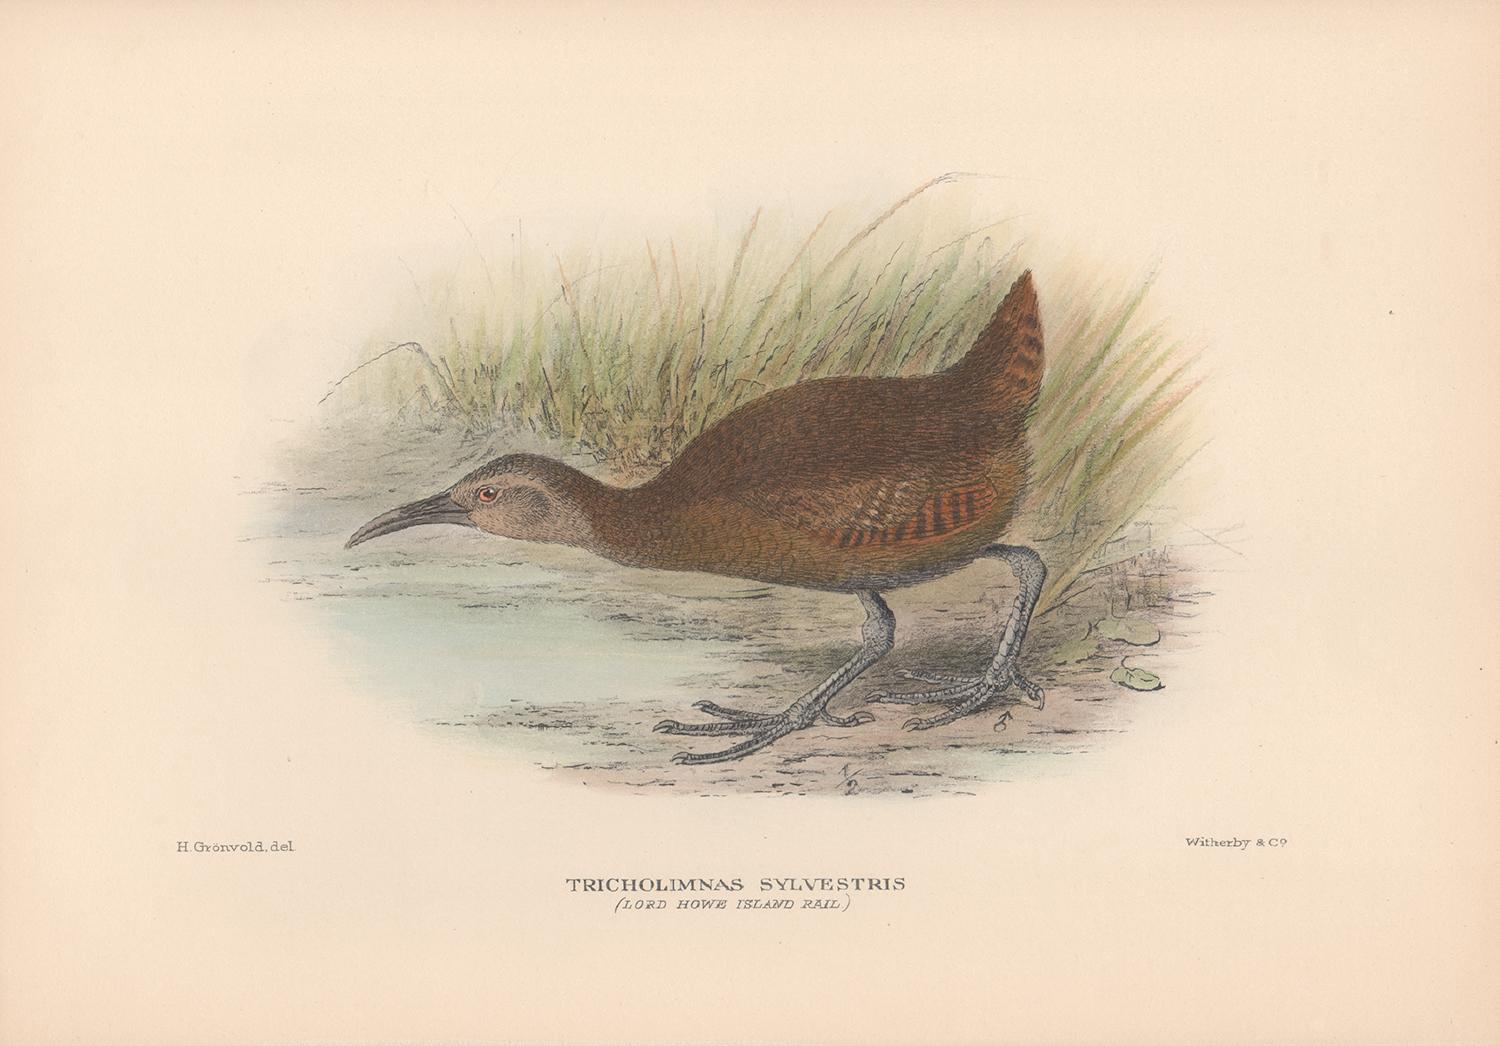 Lord Howe Island Rail, Water Bird lithograph with hand-colouring, 1928